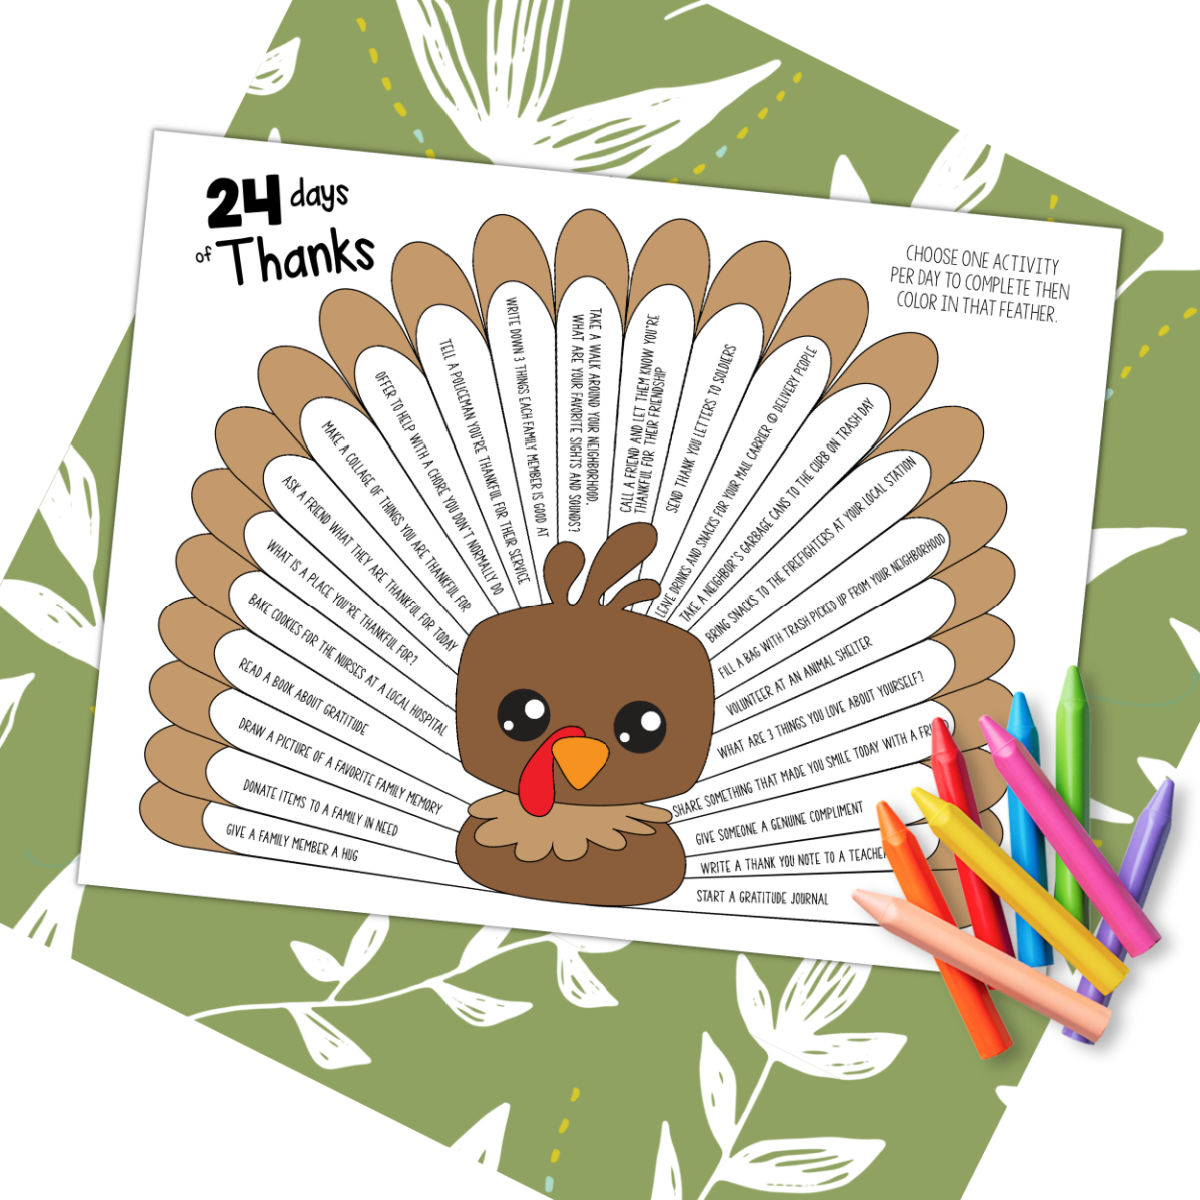 Hero image of the 24 days of thanks and giving printable